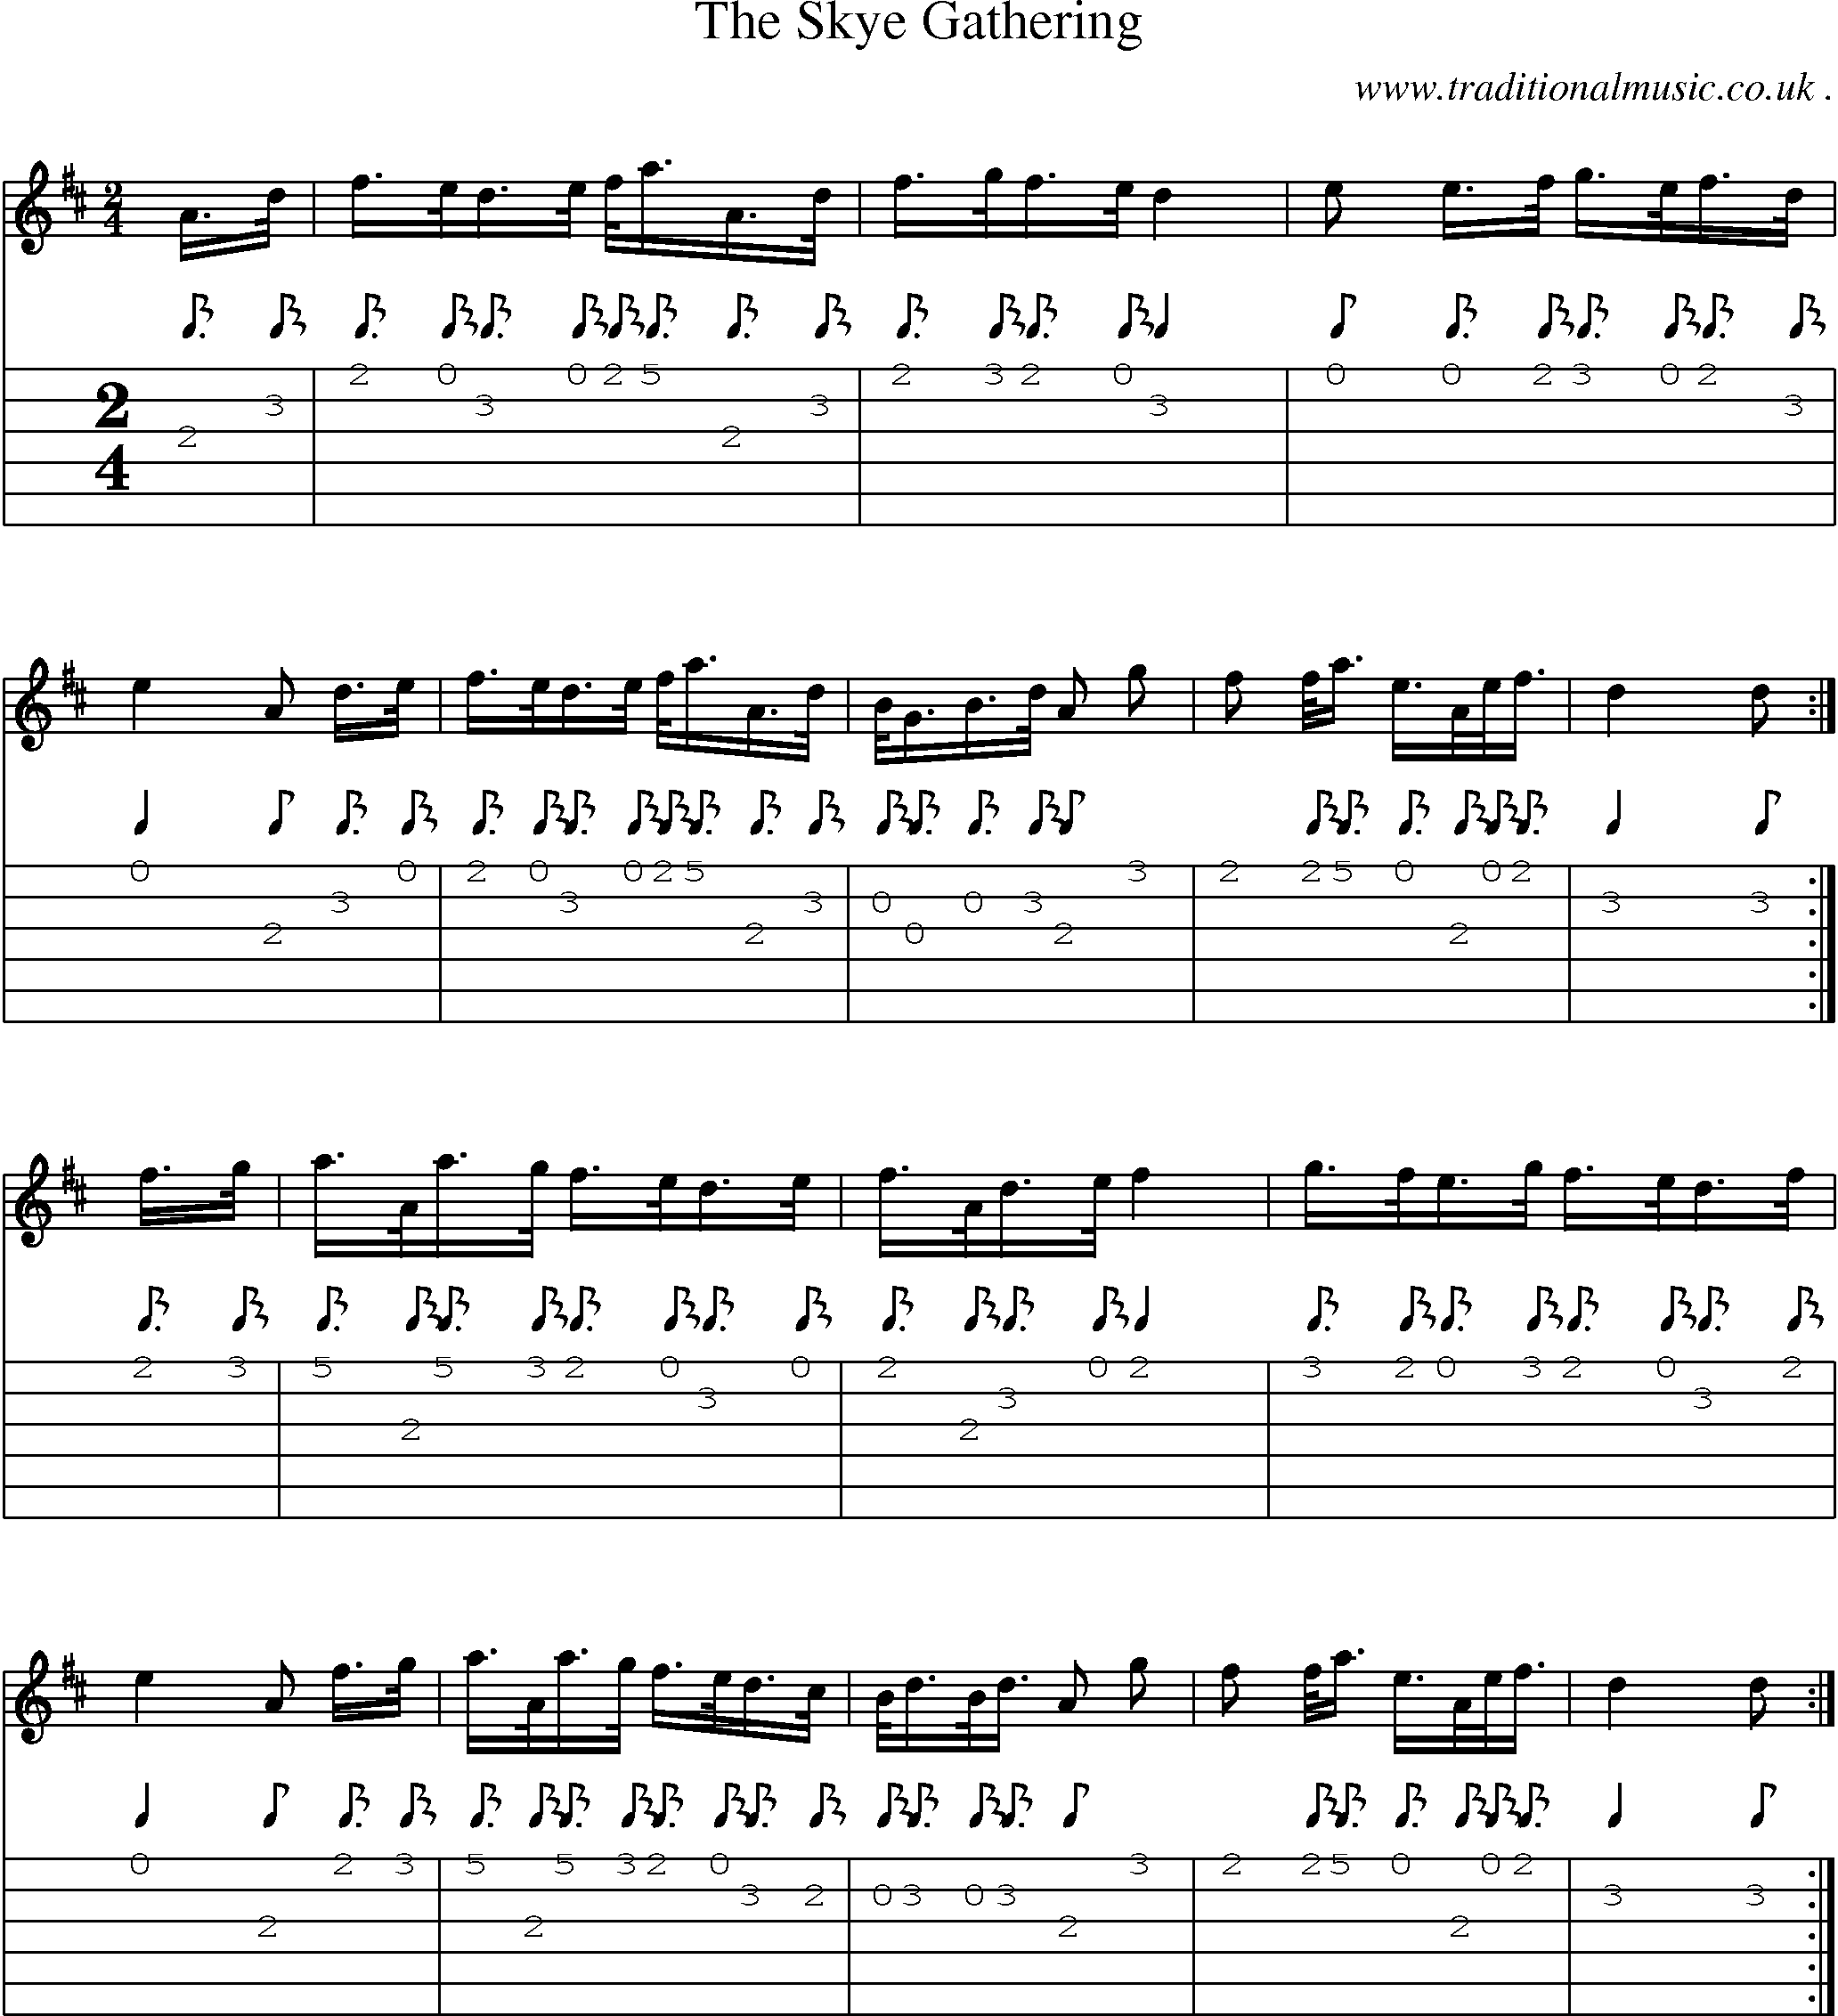 Sheet-music  score, Chords and Guitar Tabs for The Skye Gathering